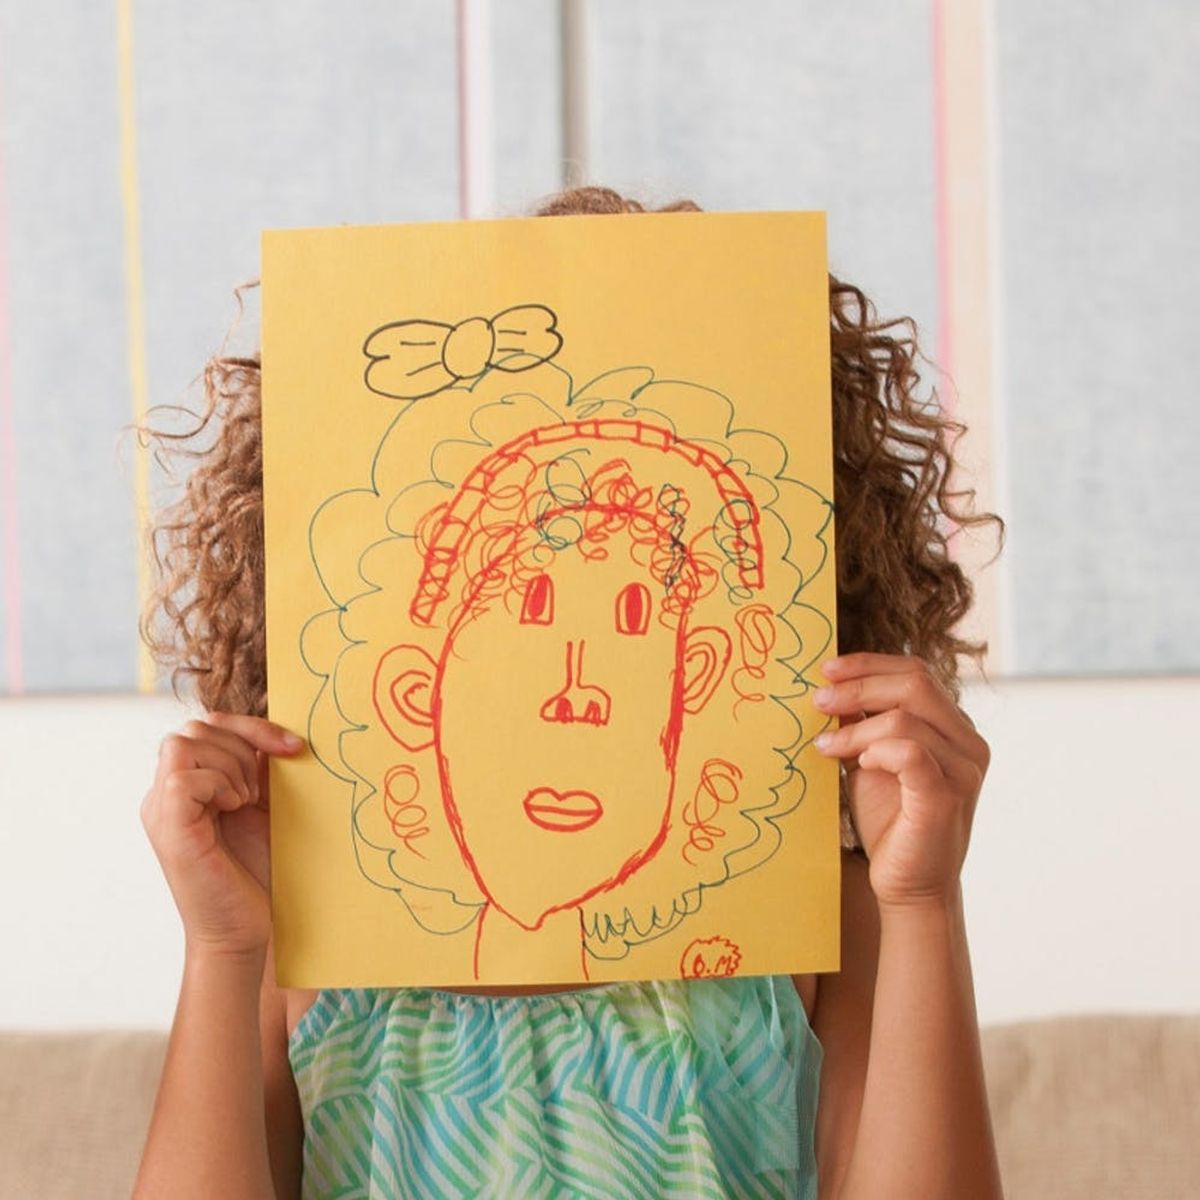 6 Creative Ways to Save Your Kid’s Artwork Without Creating Clutter